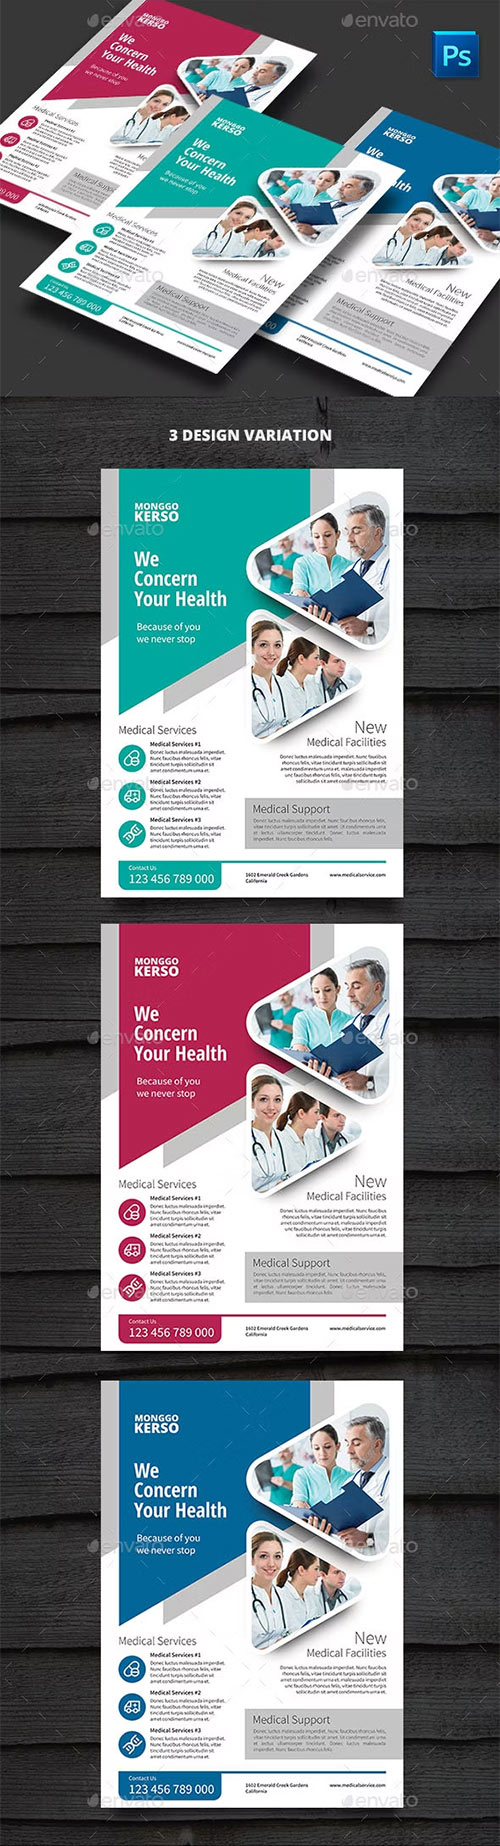 Health Care Flyer Template 22634936